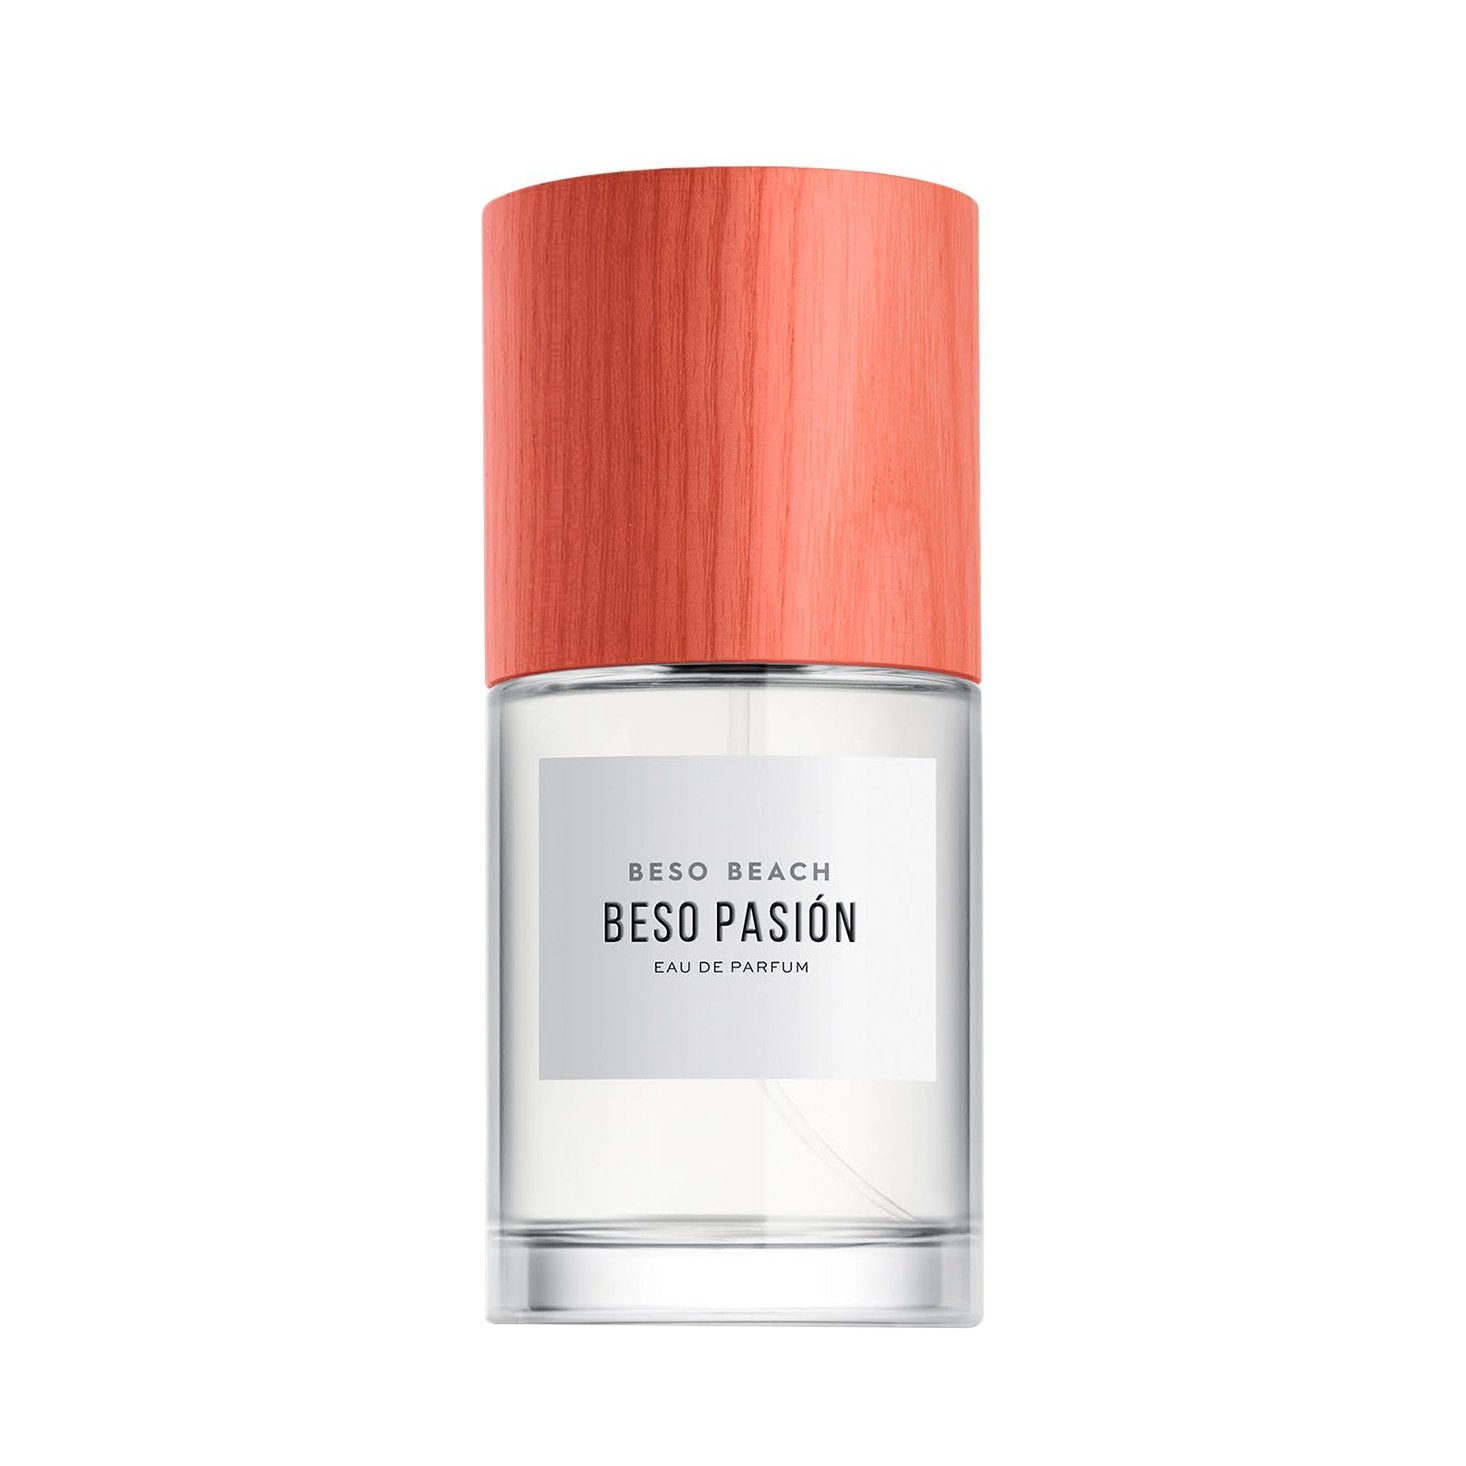 BEON.COM.AU Beso Pasion takes inspiration from sweet summer breezes that caress the coastline Mediterranean islands. The breeze is infused with sea salt, and the delicious aroma of fig trees, and layered with fragrant grass cured by the hot sun. Created by renowned perfumer Jordi Fernández for Besi Beach. 10... Beso Beach at BEON.COM.AU